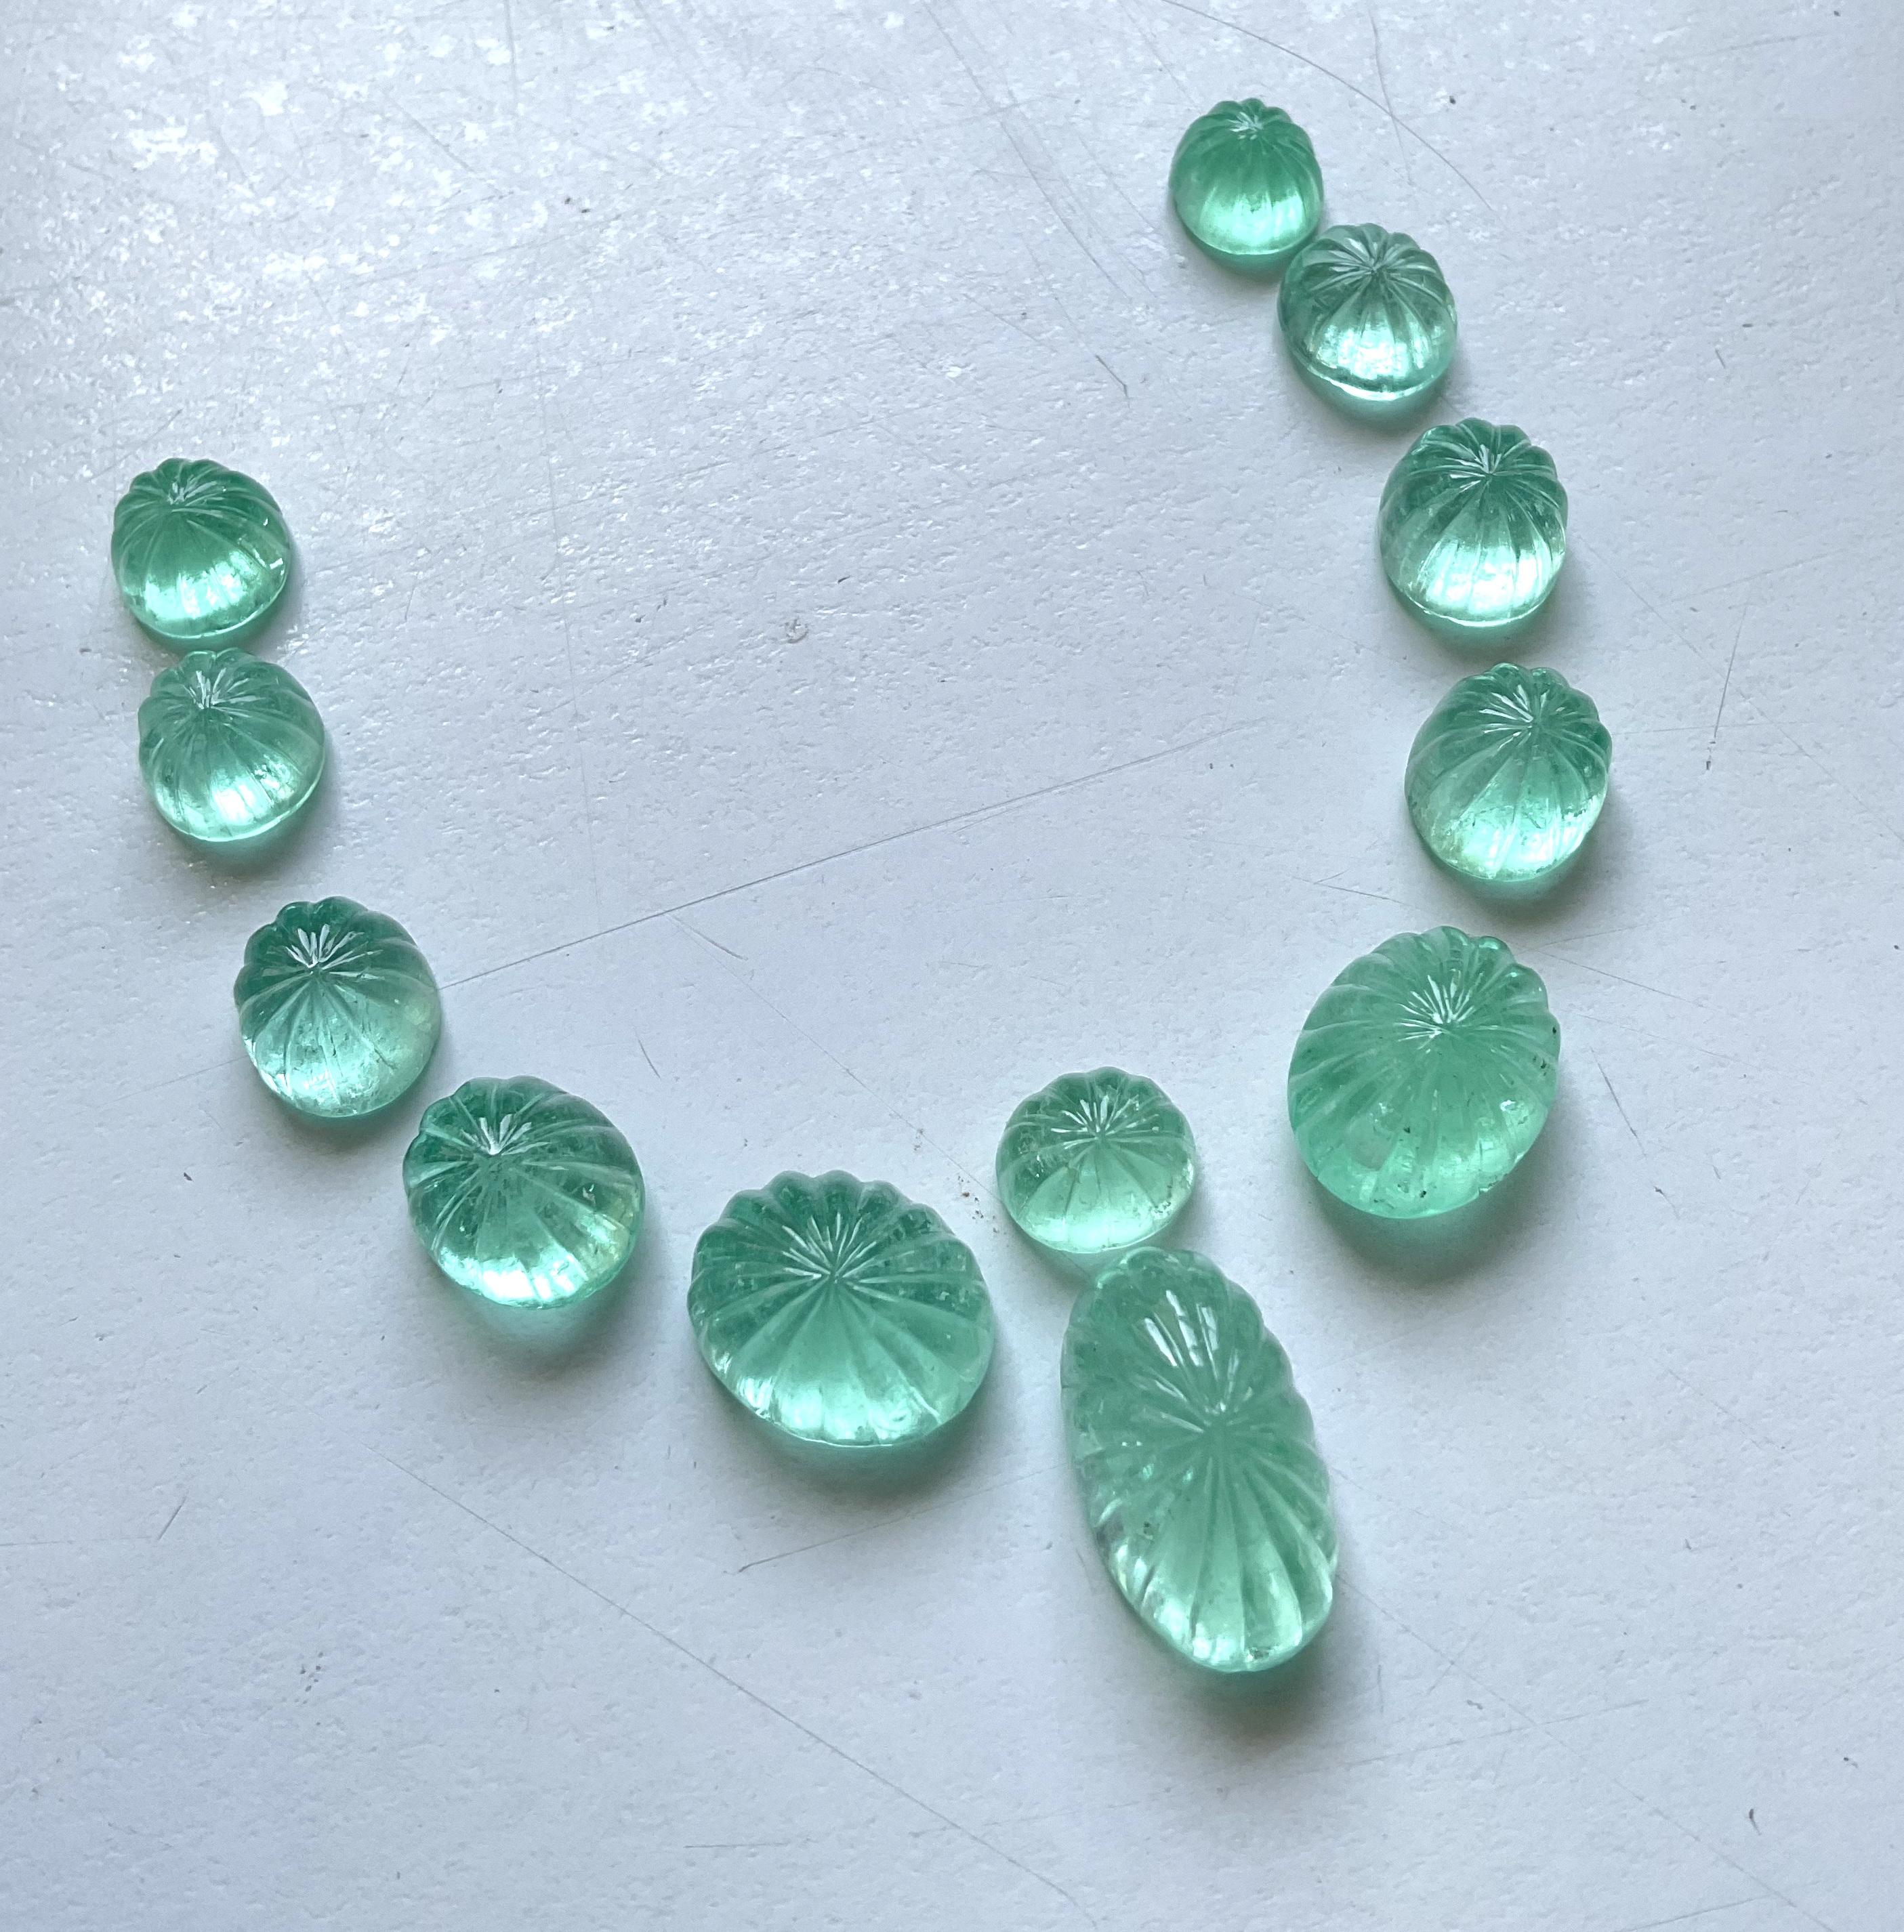 60.23 Carats Top Colombian Emerald Carved Cabochon For Jewelry Natural Gems For Sale 1